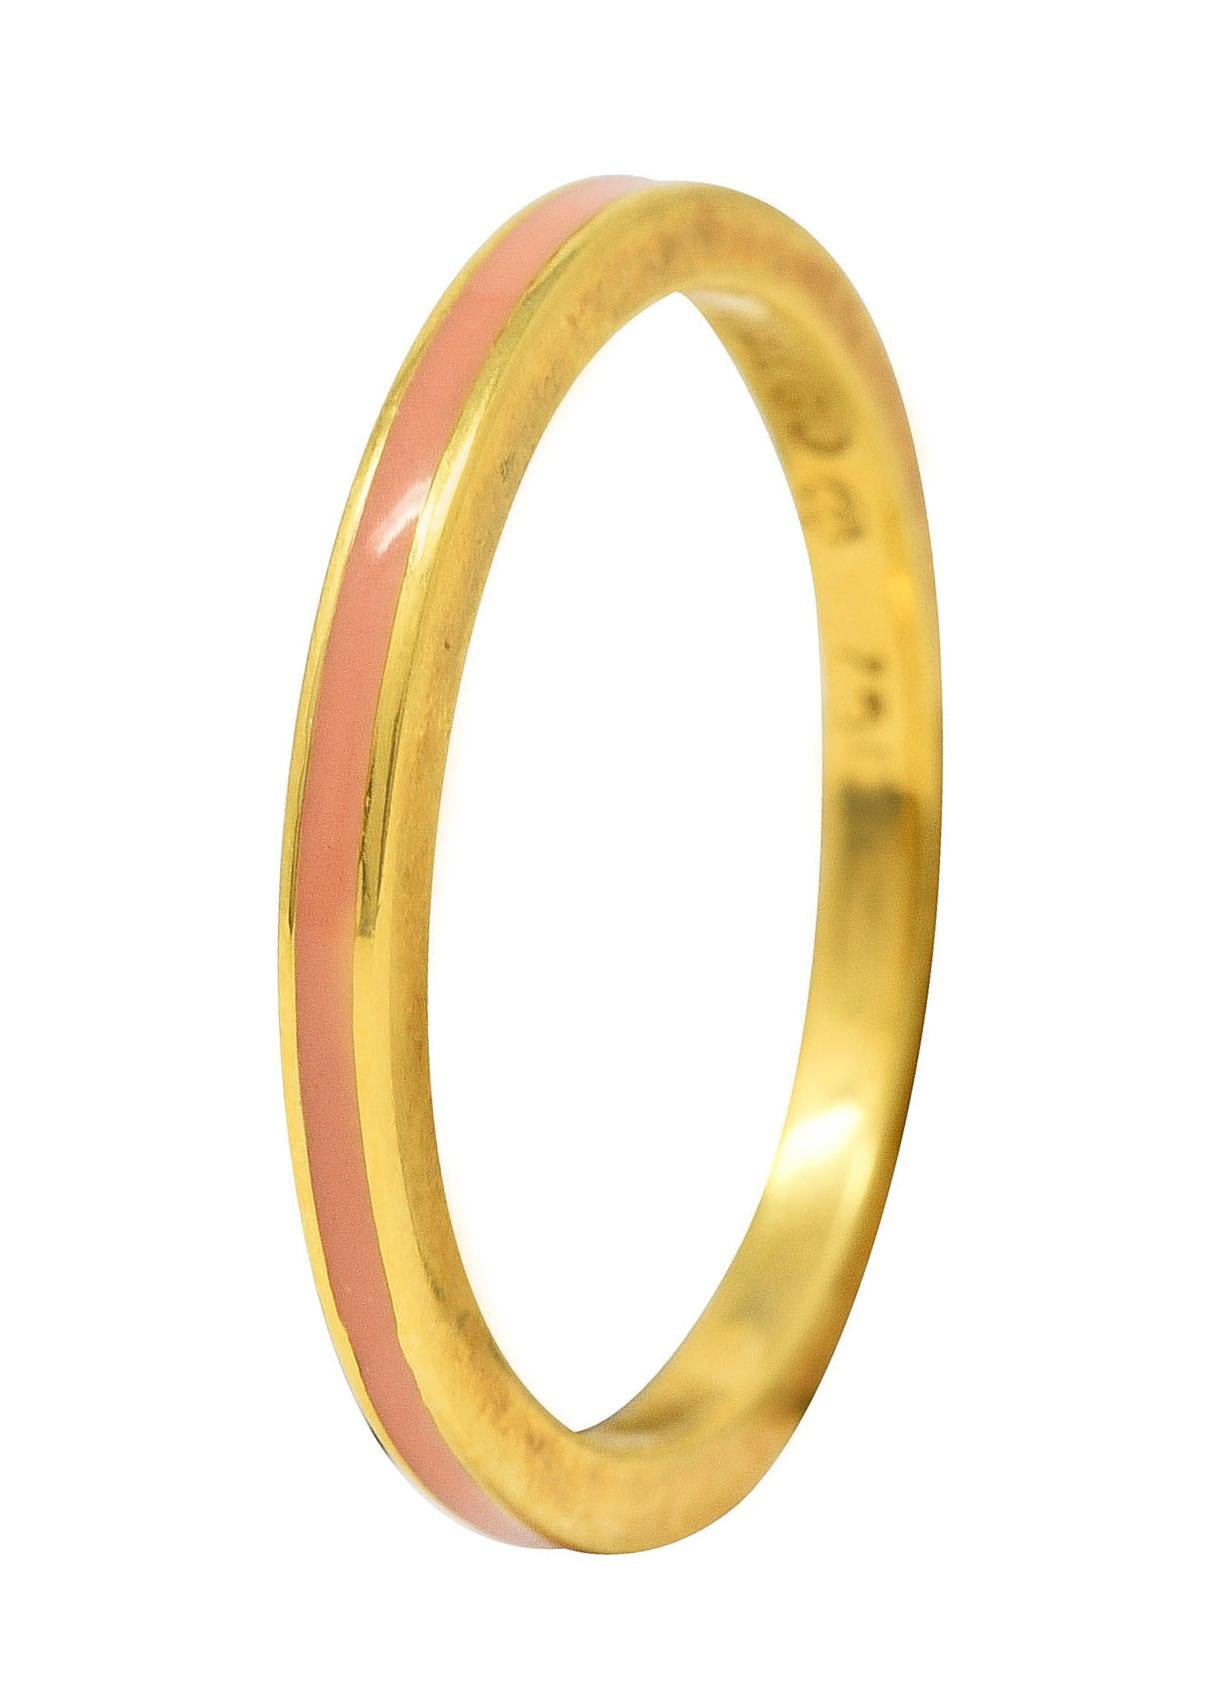 Band ring features a recessed enamel channel fully around. Glossy and opaque light peach in color. With high polished gold surround. Stamped 750 for 18 karat gold. Fully signed with maker's mark for Hidalgo. Circa: 1990's. Ring size: 6 3/4 and not